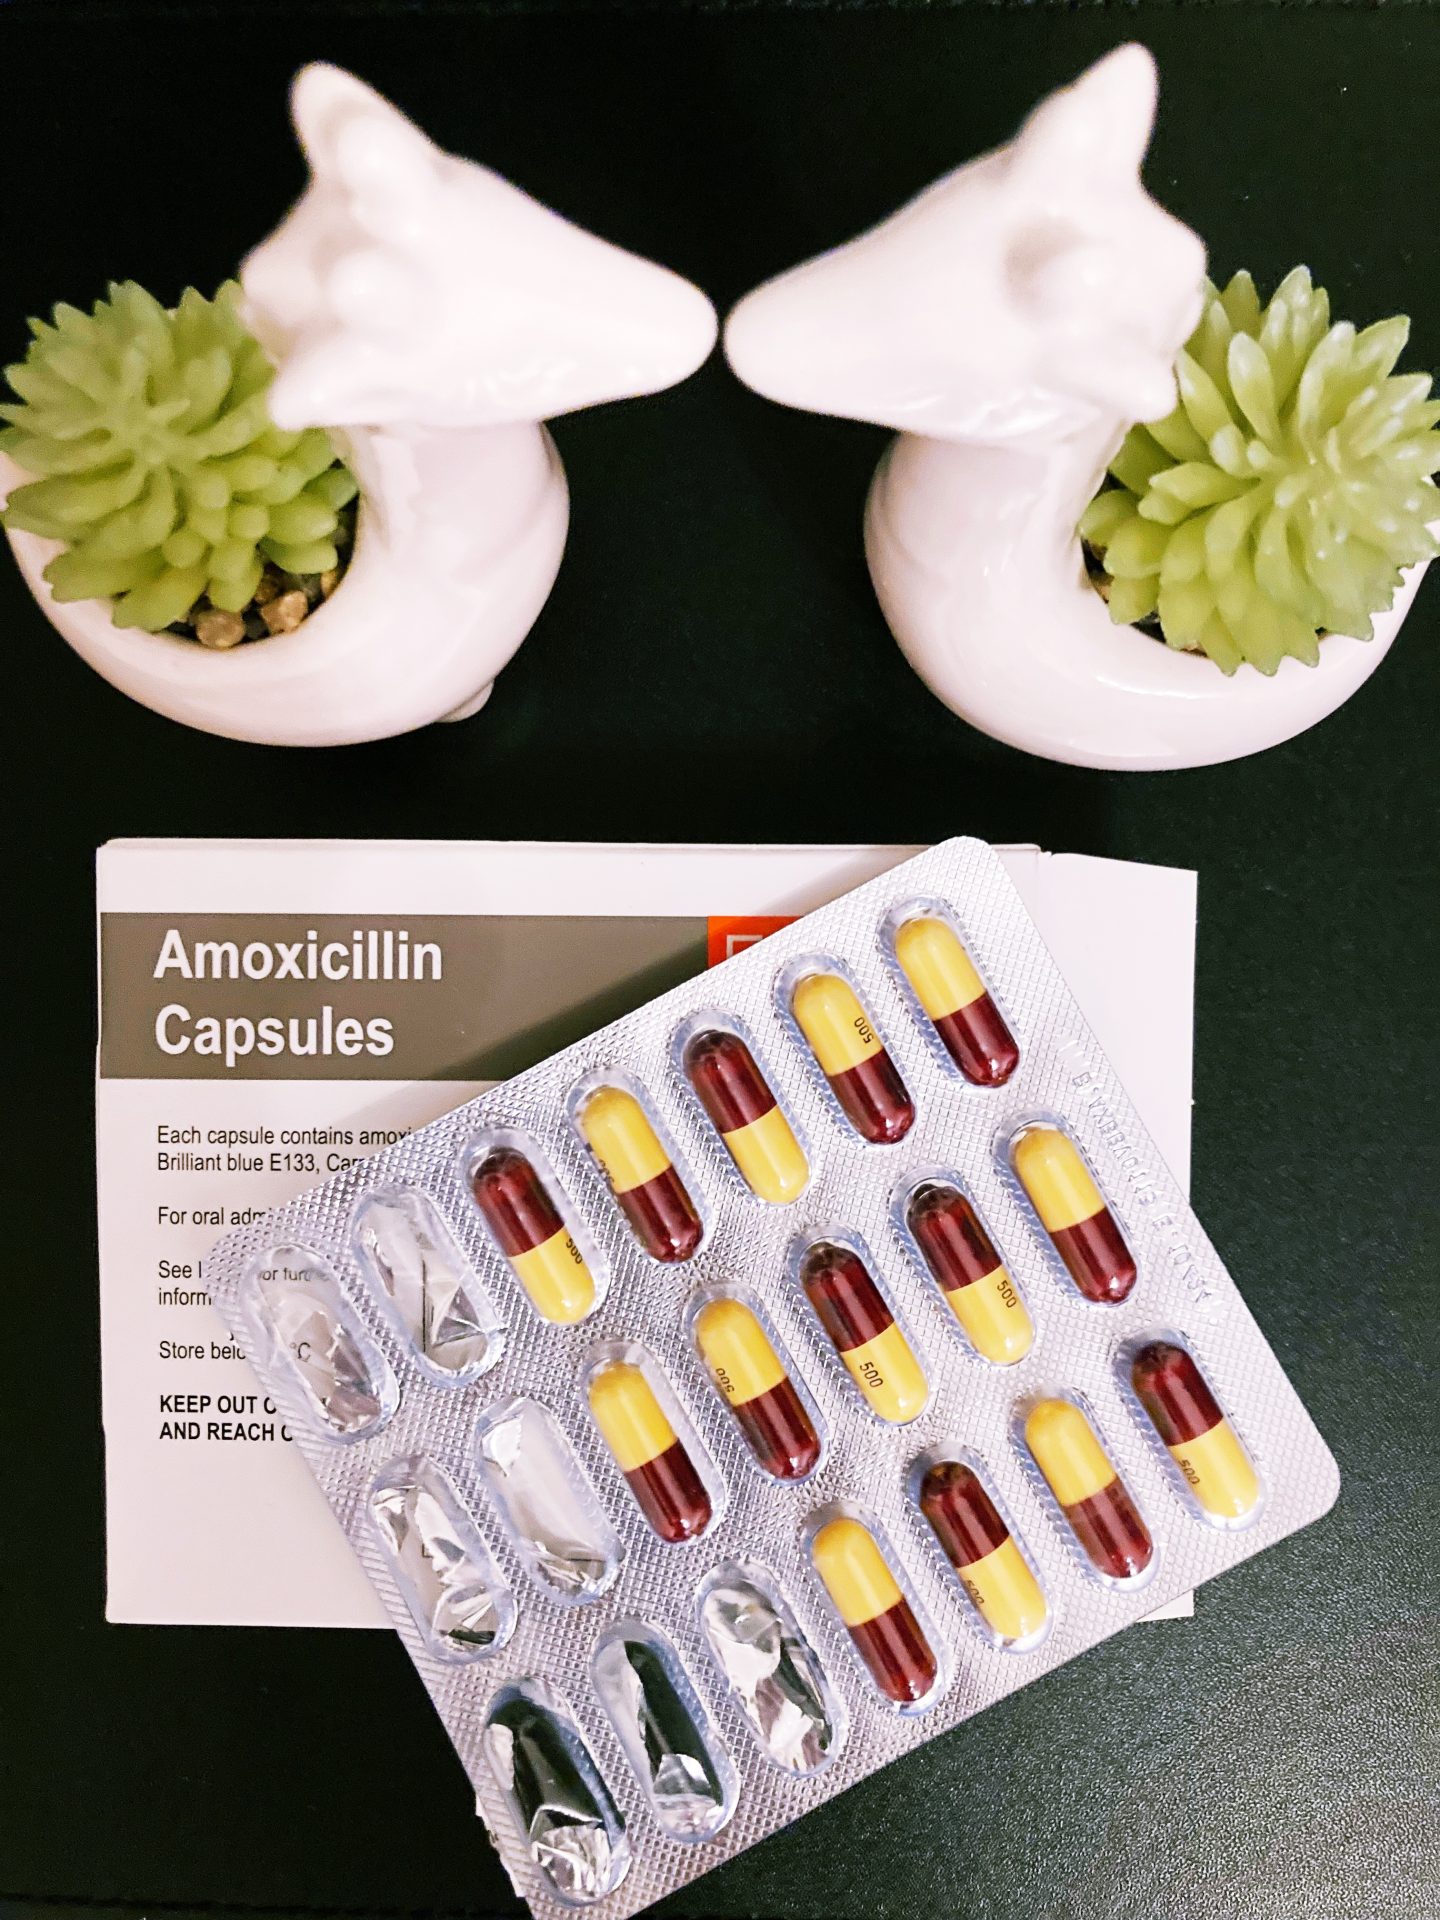 A bird's eye view photo of a black tabletop and a box of Amoxicillin antibiotics, with the sheet of capsules on top. There are also two small giraffe succulents next to them.